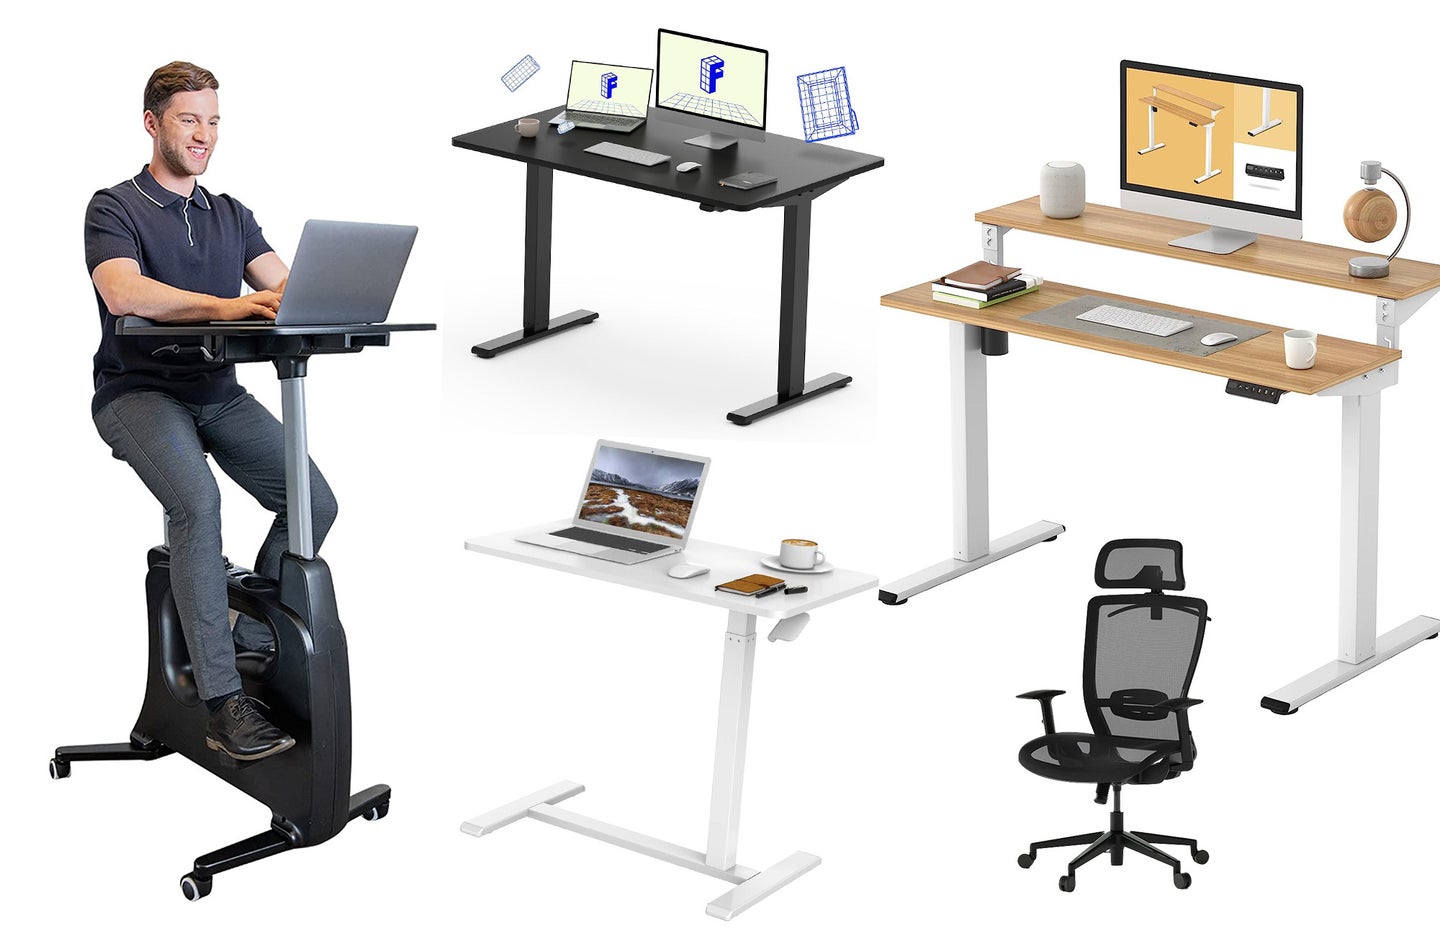 Flexispot has great savings on standing desks, chairs, and bed frames this Amazon Prime Day.